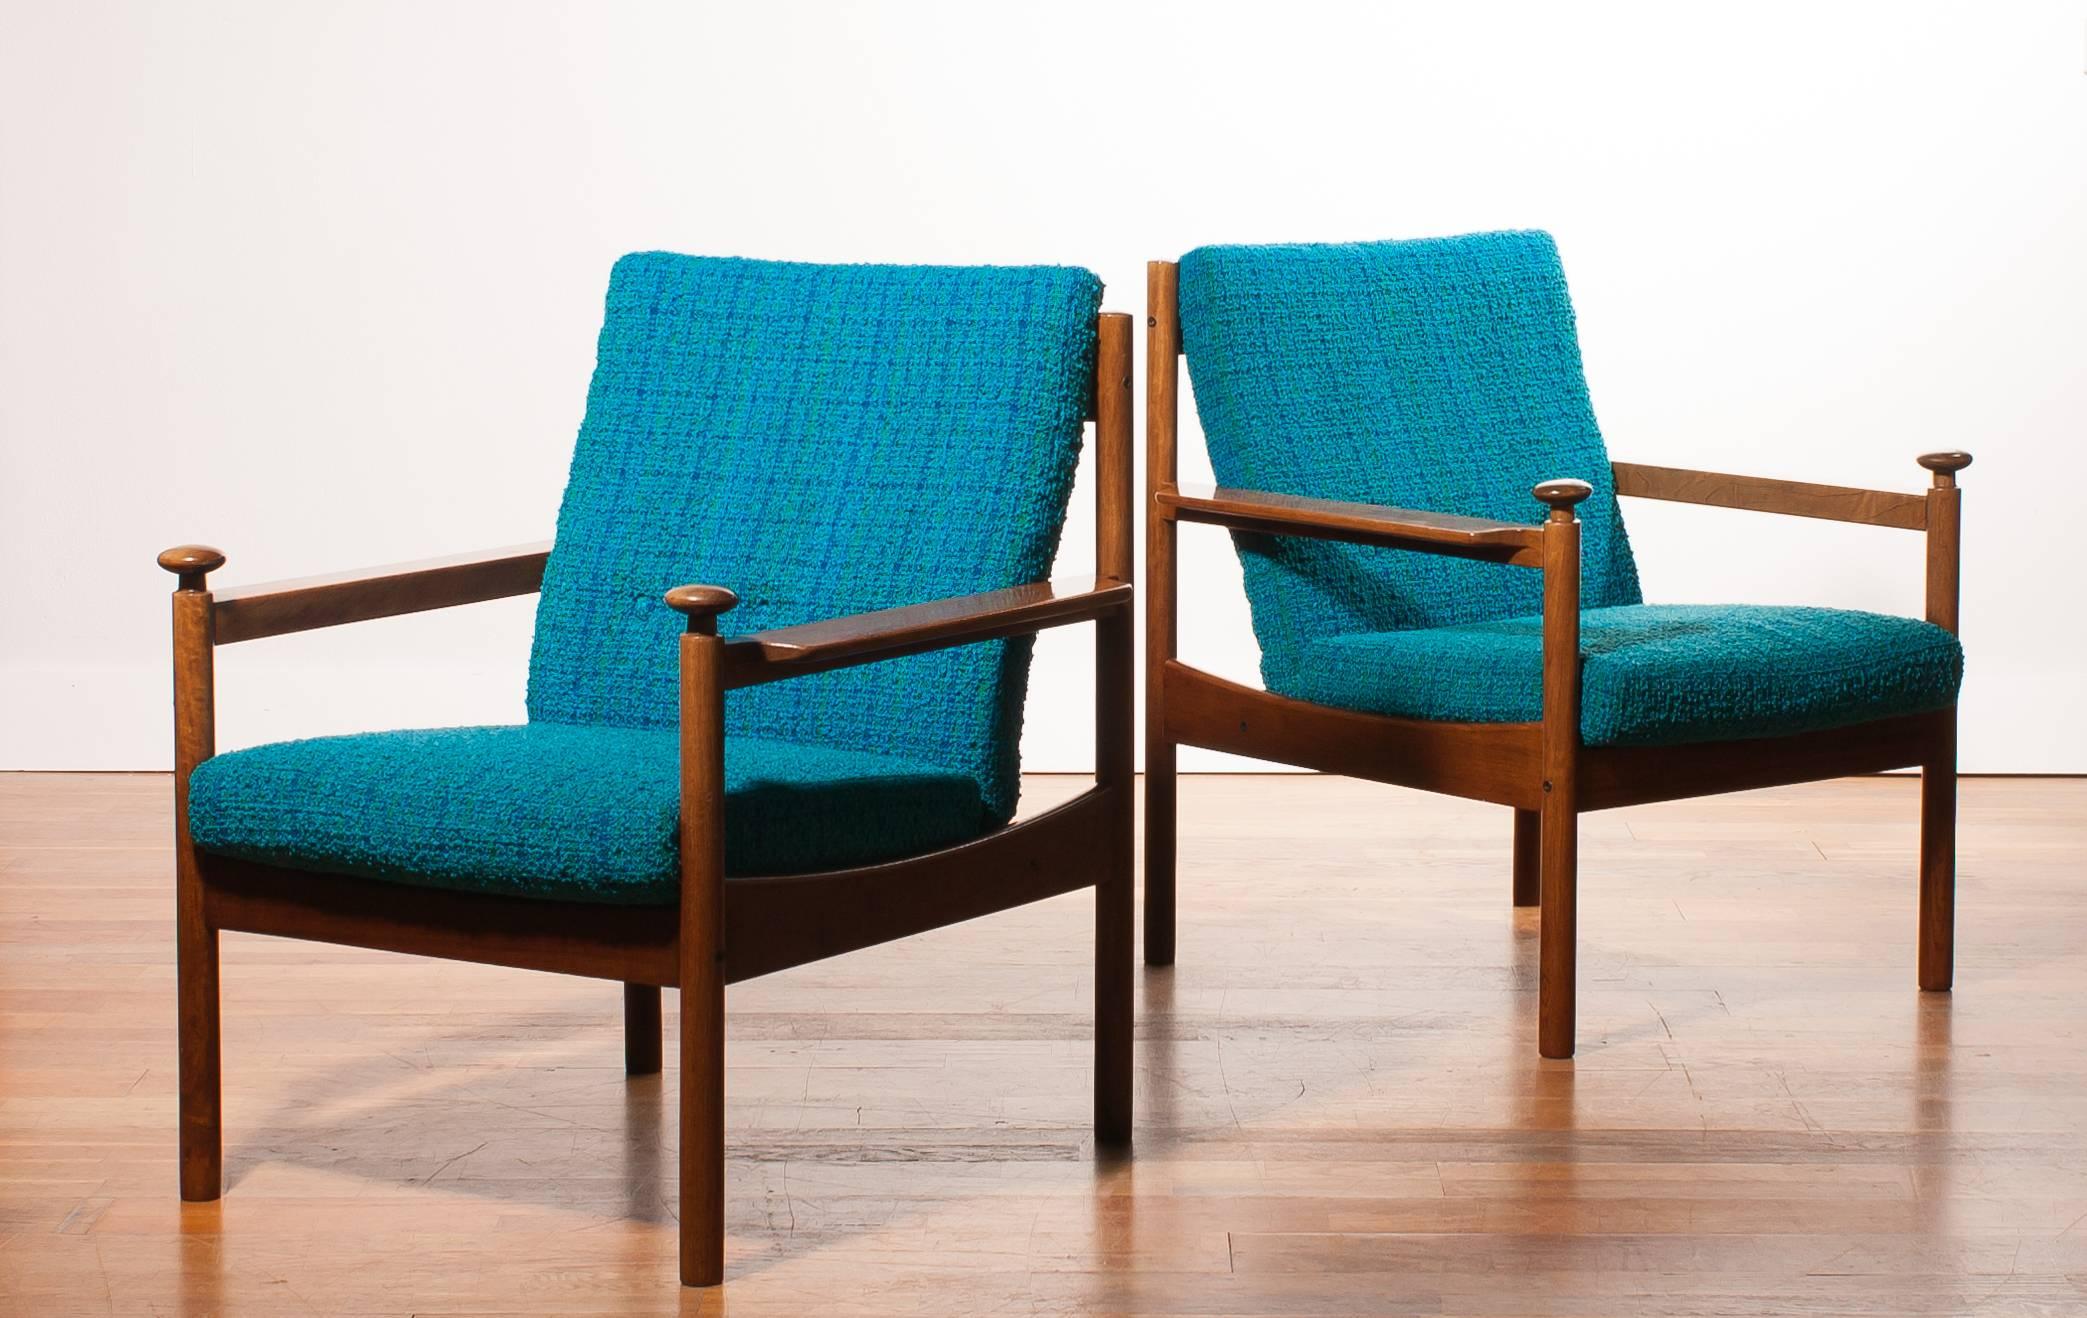 Beautiful chairs designed by Torbjørn Afdal for Sandvik & Co Mobler Norway.
The wooden frame with the blue fabric cushions makes it a very nice combination.
Period 1950s
Dimensions: H 83 cm, W 70 cm, D 71 cm, Sh 40 cm.